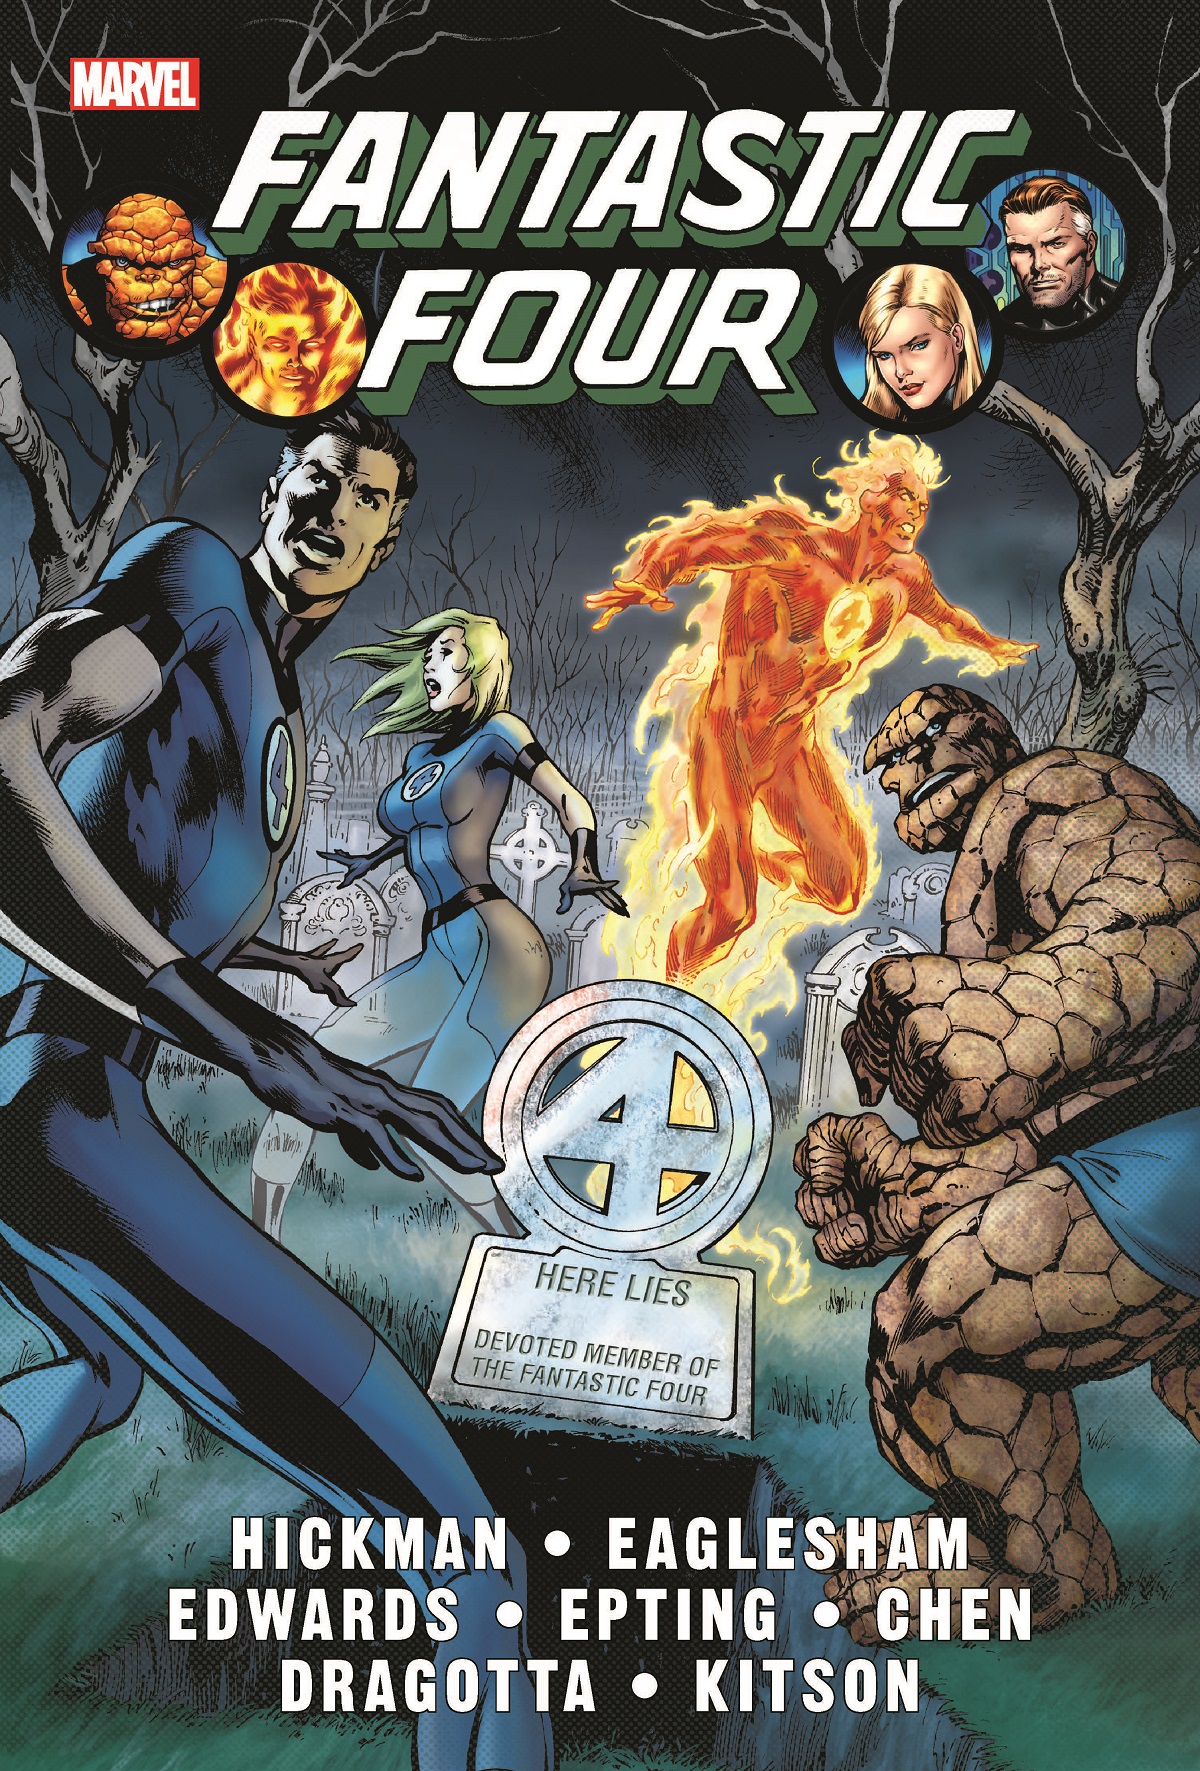 Fantastic Four By Jonathan Hickman Omnibus Vol. 1 (Hardcover)